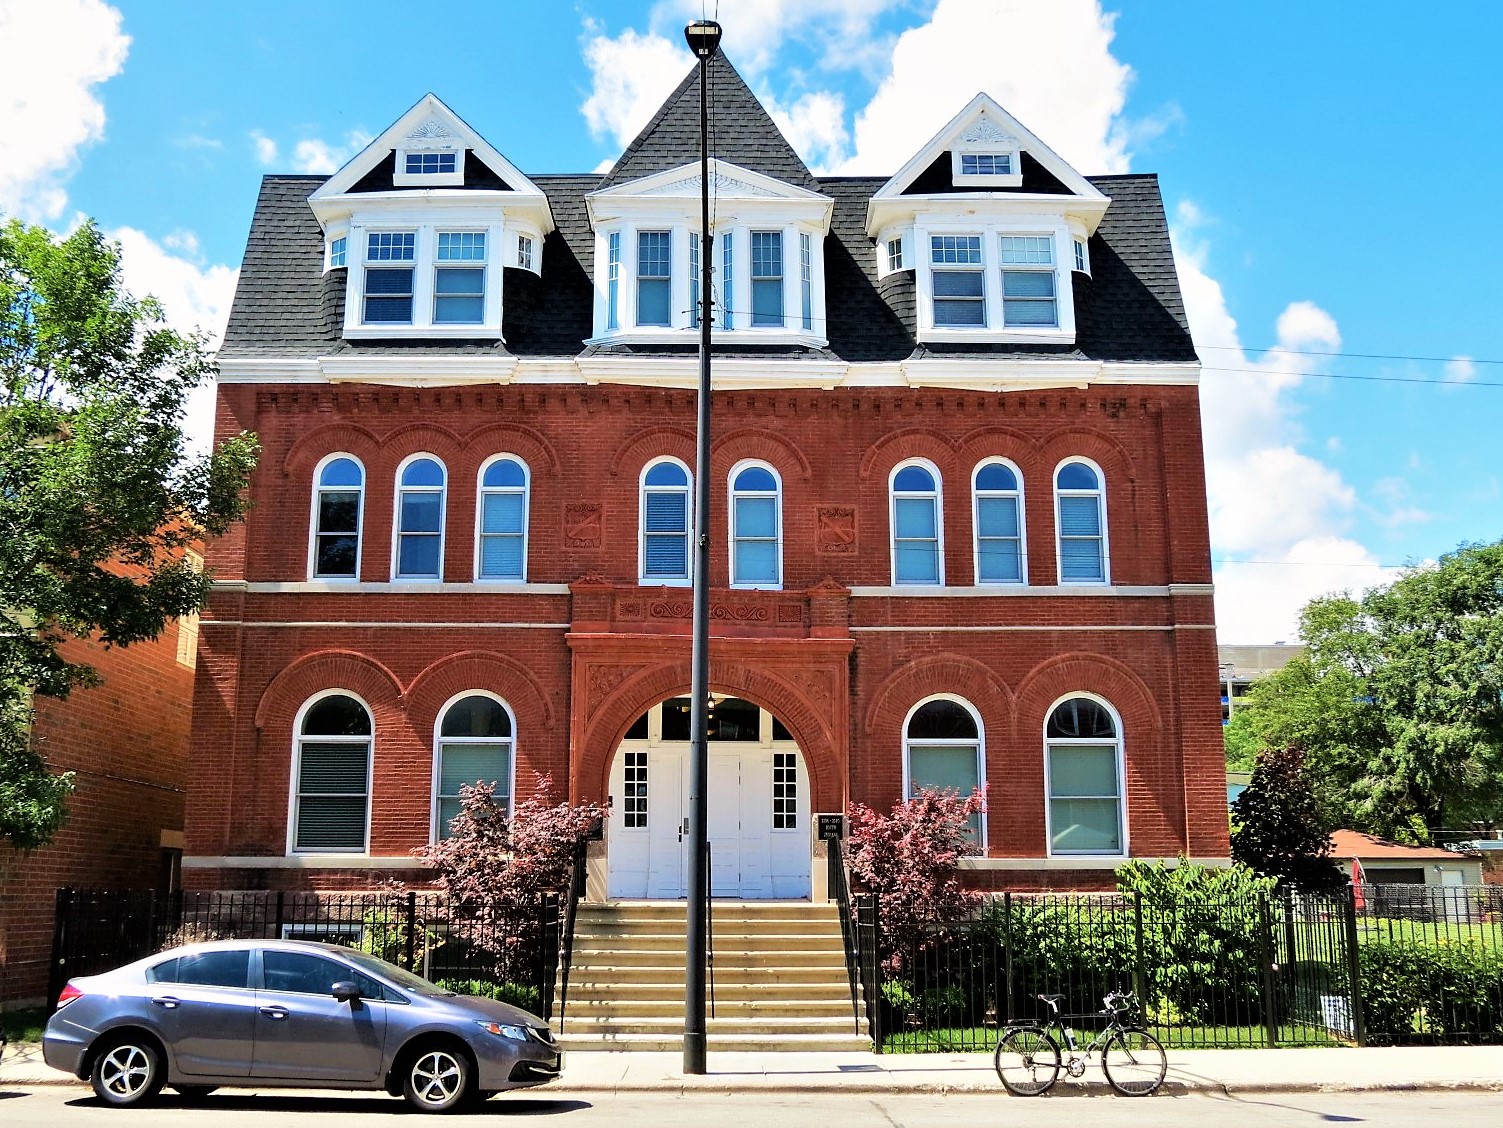 A tour bike standing at front of a three story double lot Queen Anne red brick hall with an arched center entrance